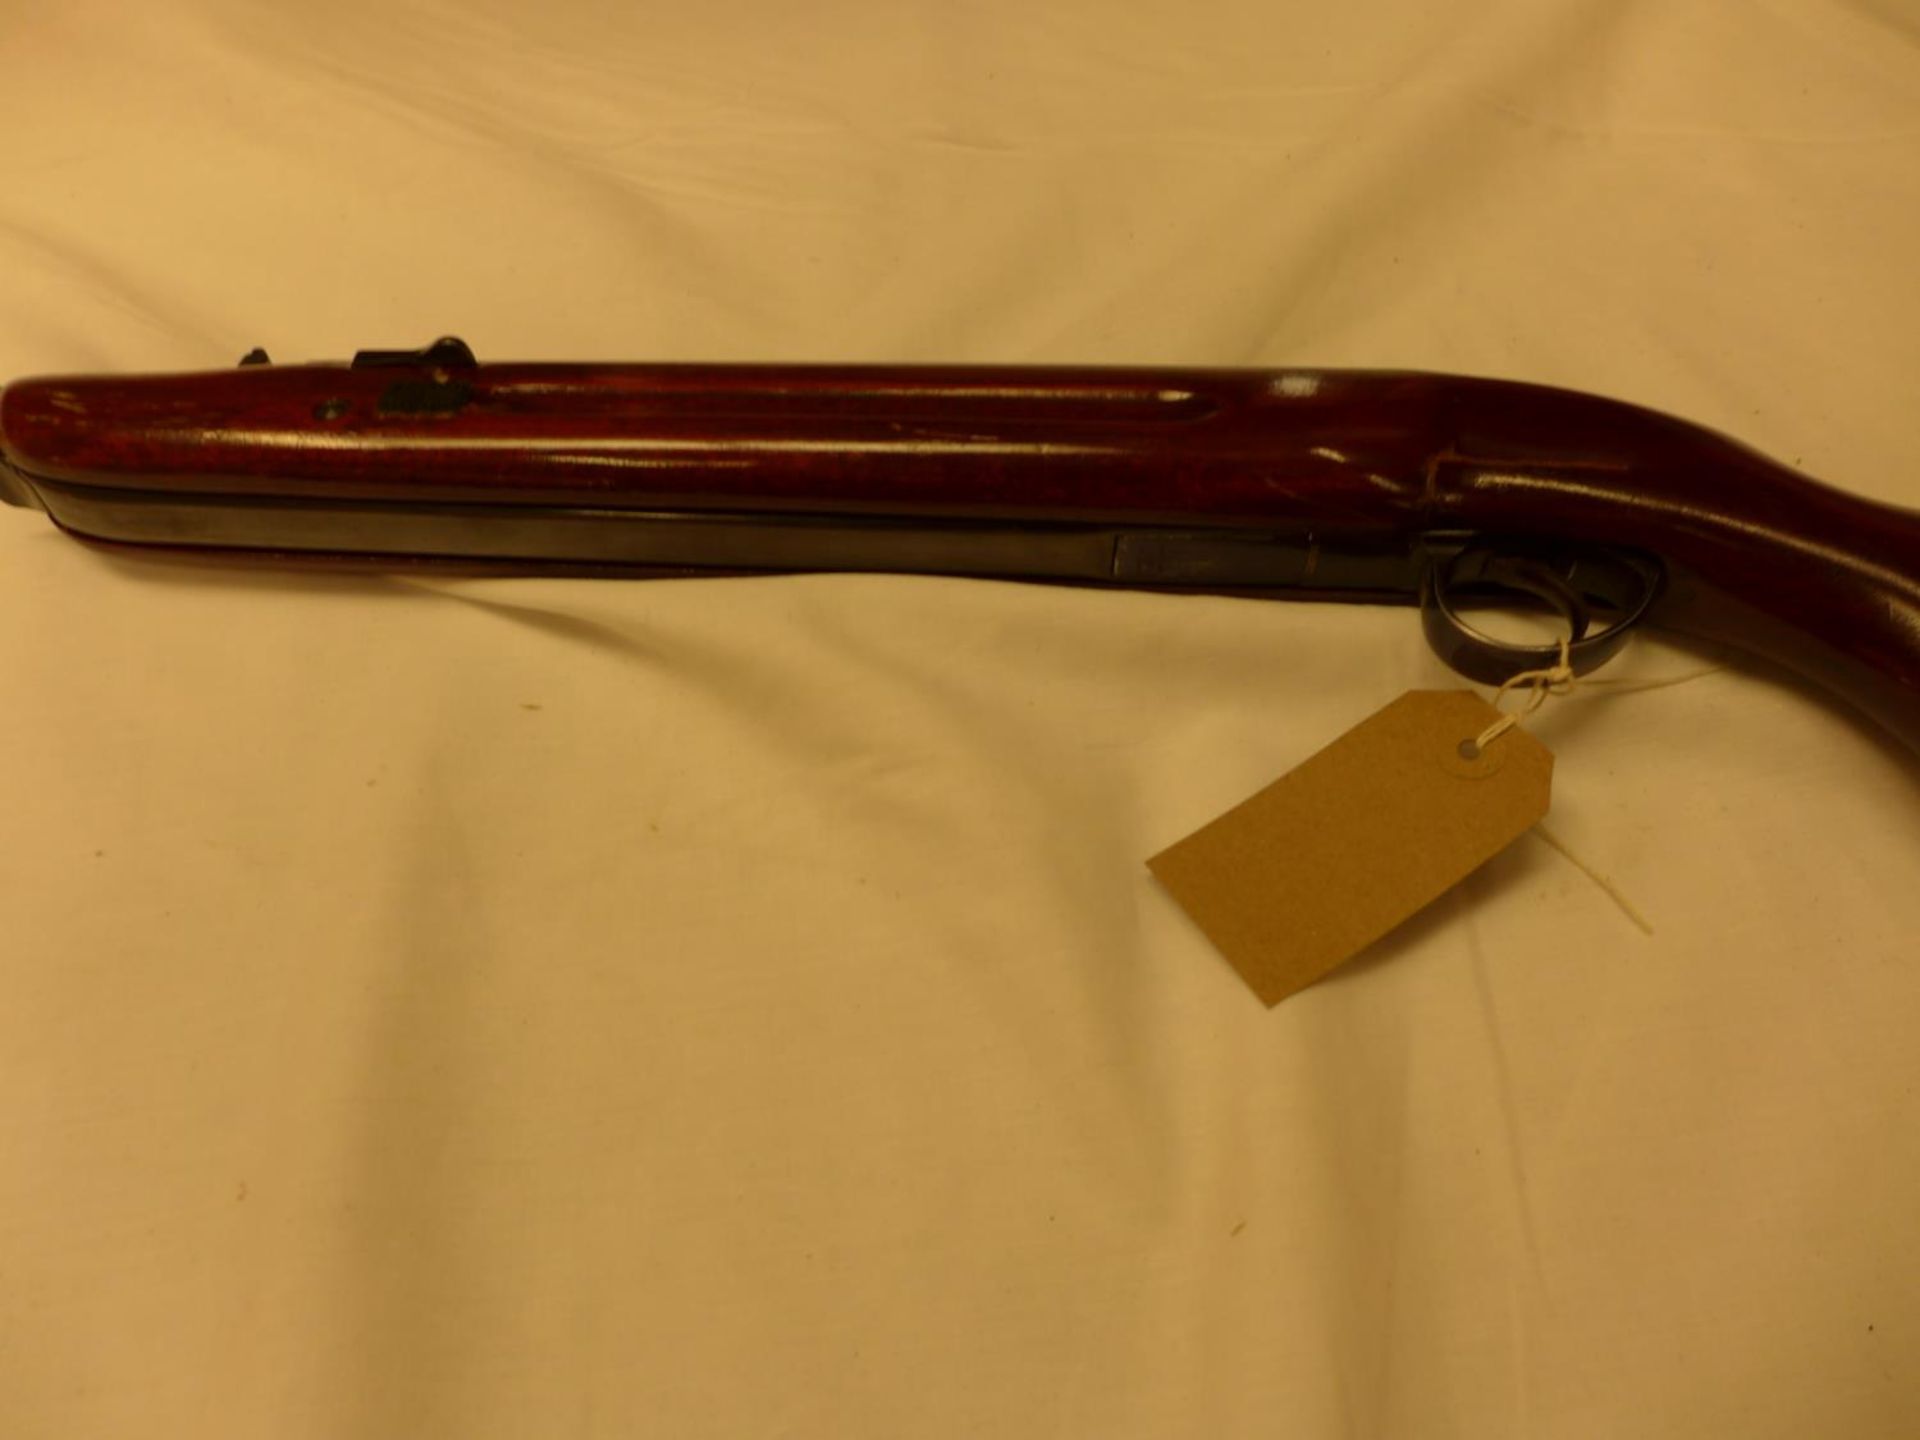 A B.S.A. 'AIRSPORTER' .22 CALBIRE UNDERLEVER AIR RIFLE, 47CM BARREL, WOODEN STOCK - Image 5 of 6